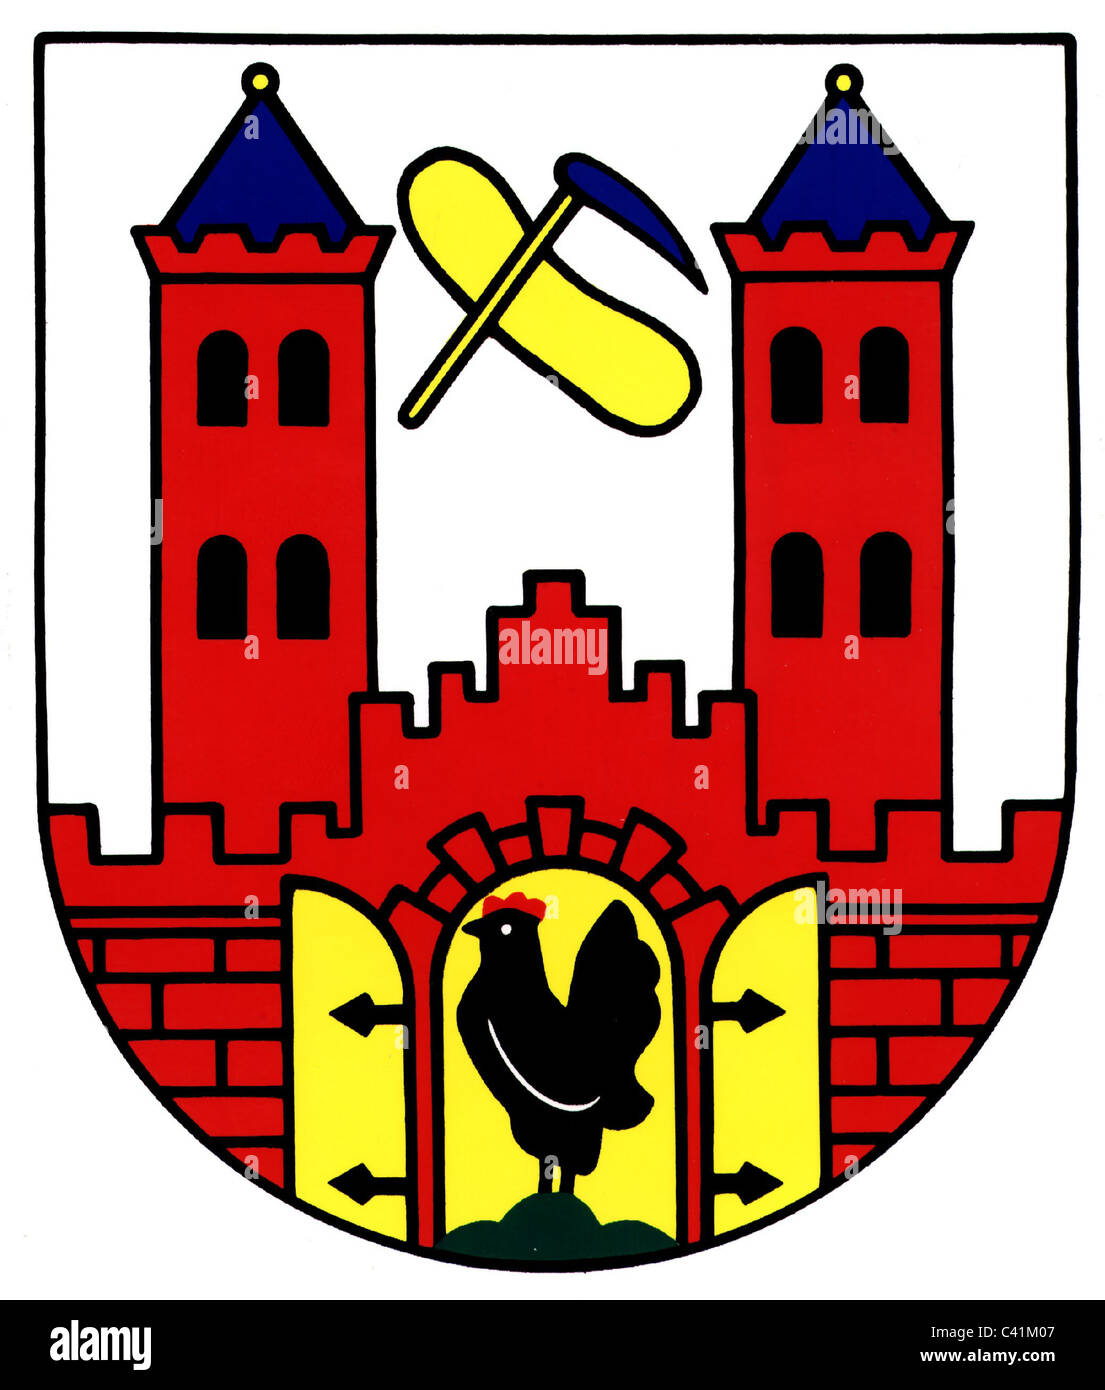 coat of arms / emblems, Suhl, city arms, Thuringia, Germany, heraldry, city, emblem, emblems, clipping, cut out, cut-out, cut-outs, heraldic animal, heraldic animals, city wall, city walls, hen, hens, city gate, city gates, tower, towers, hoe, black, red, white, blue, yellow, Central Germany, Germany, Central Europe, Europe, historic, historical, Additional-Rights-Clearences-Not Available Stock Photo